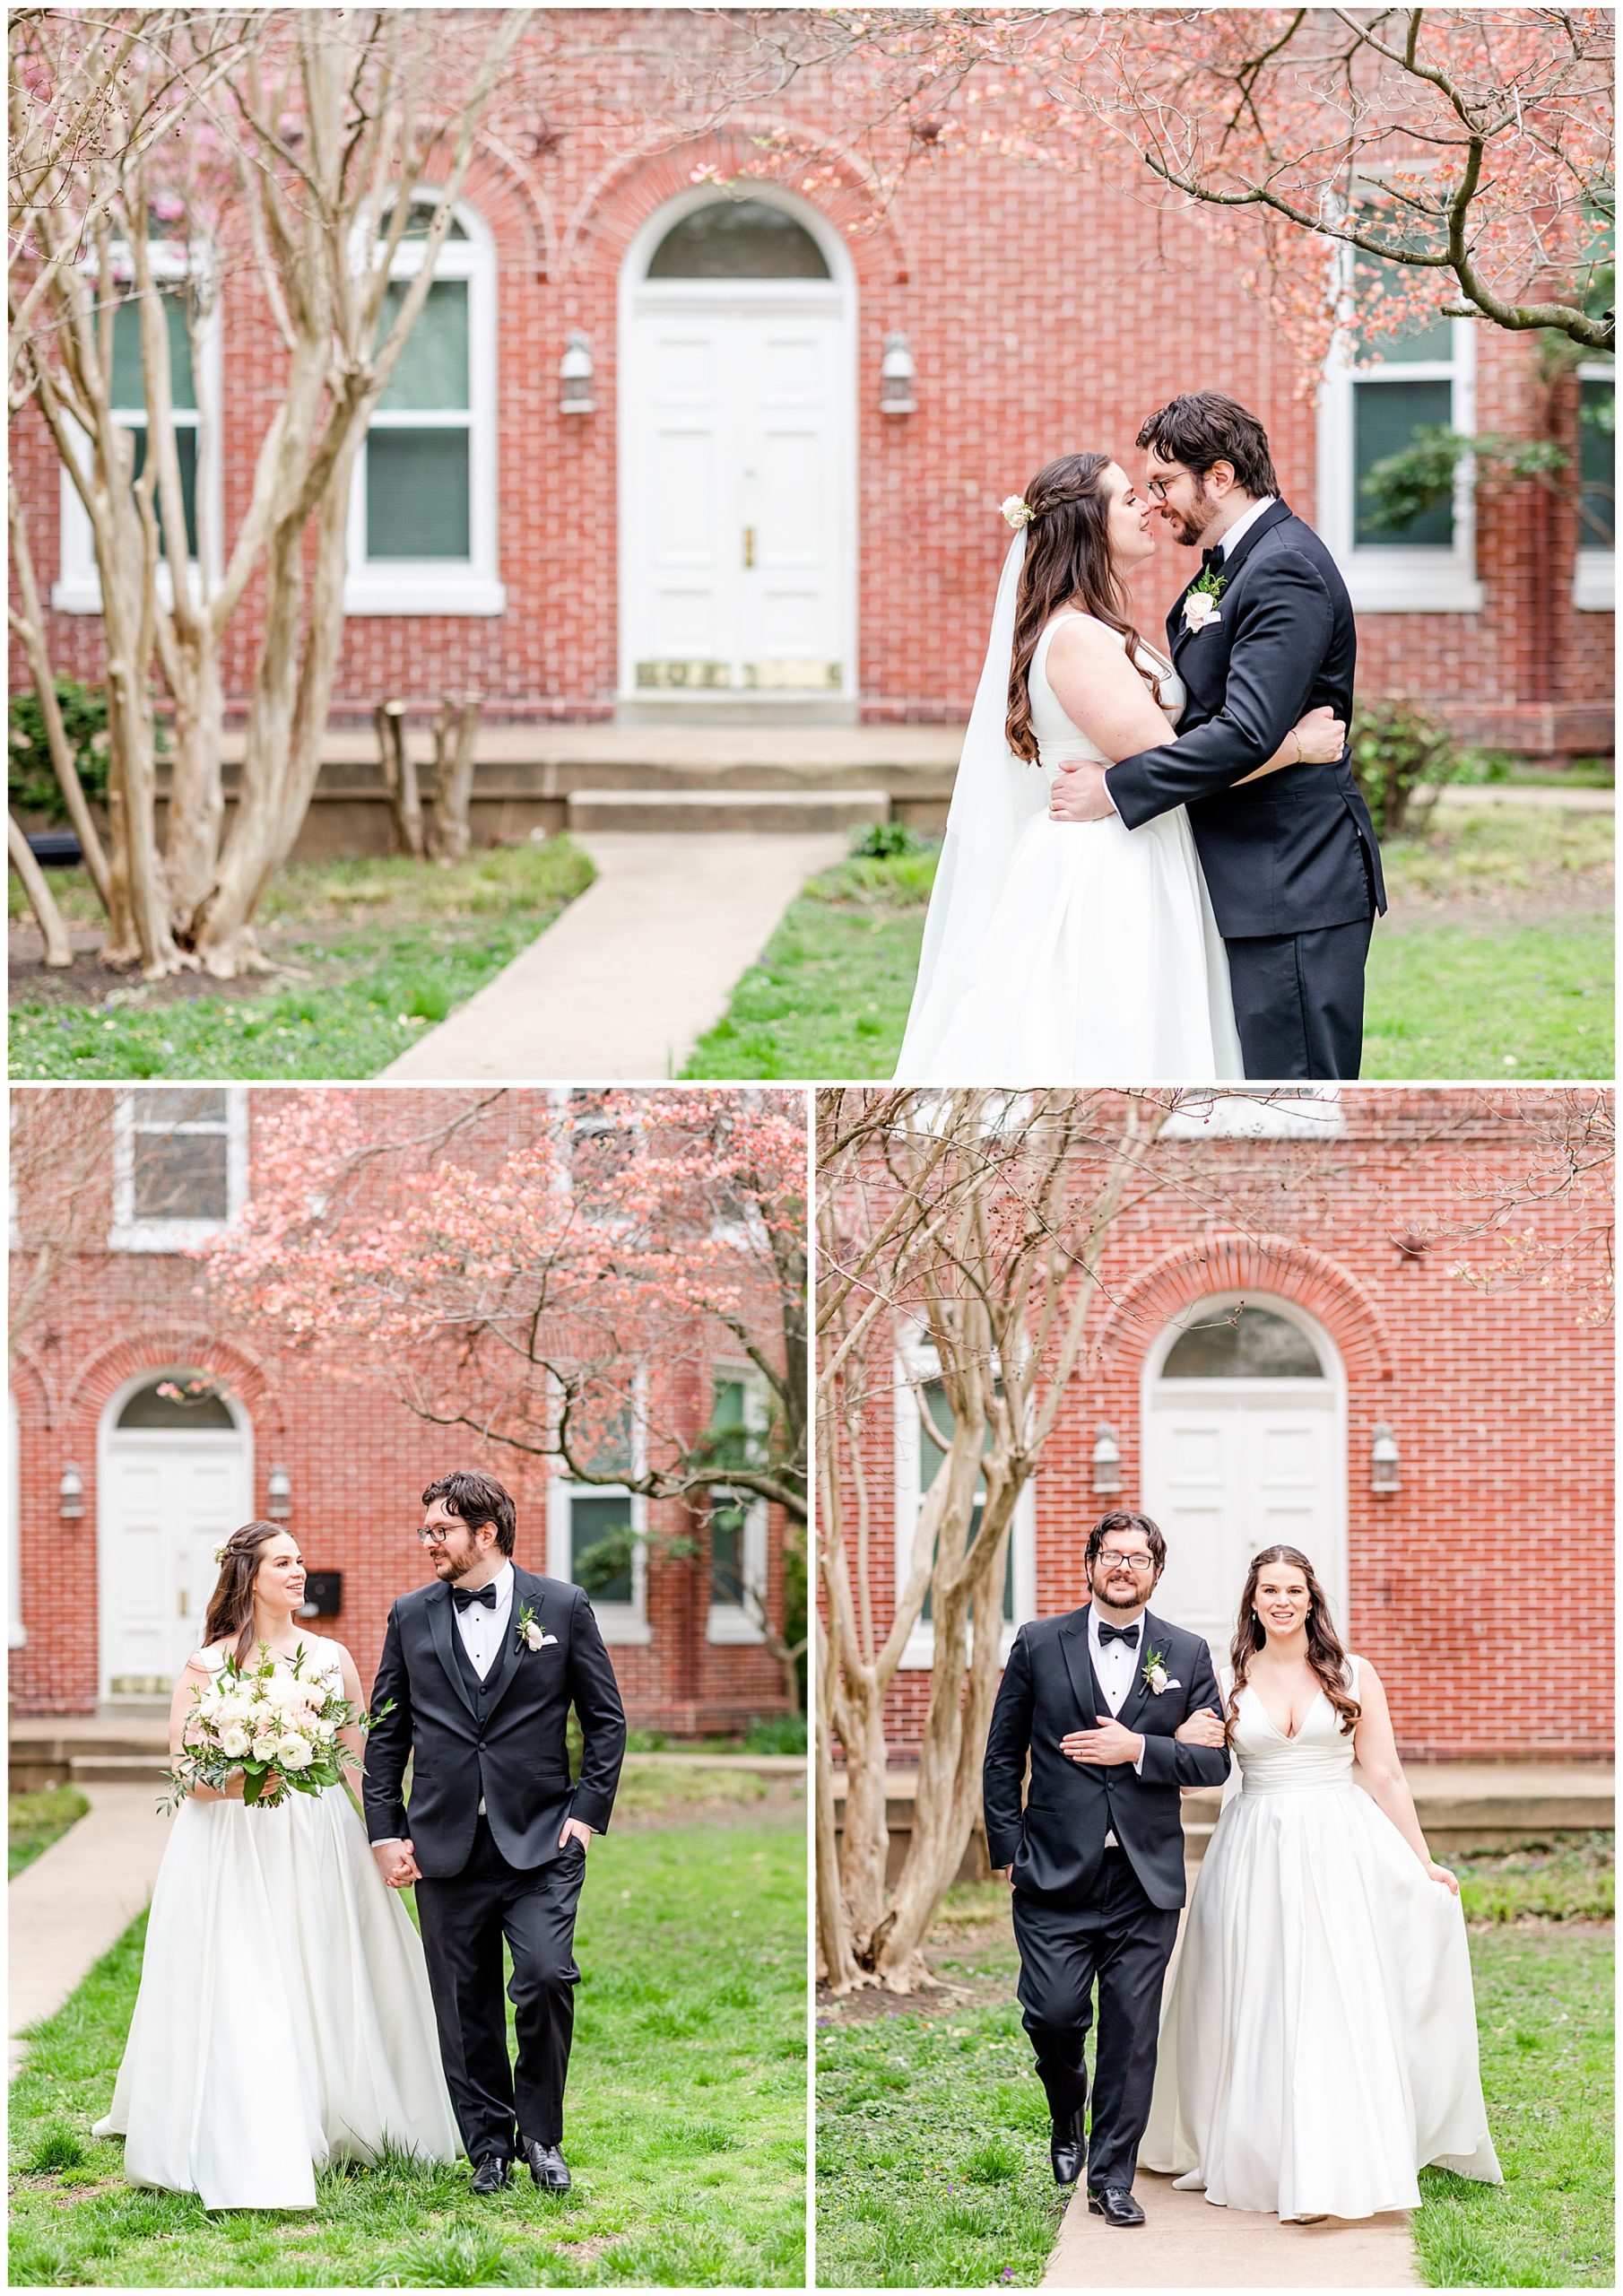 cherry blossom inspired DC wedding, sprig wedding inspiration, blush and light pink aesthetic, blush aesthetic, floral focused wedding, Grace and Glory Events City Tavern Club wedding, Georgetown wedding, Georgetown bride, city wedding, classic DC wedding, Washington DC wedding photographer, Rachel E.H. Photography, bride and groom almost kissing, couple linking arms and walking, couple holding hands